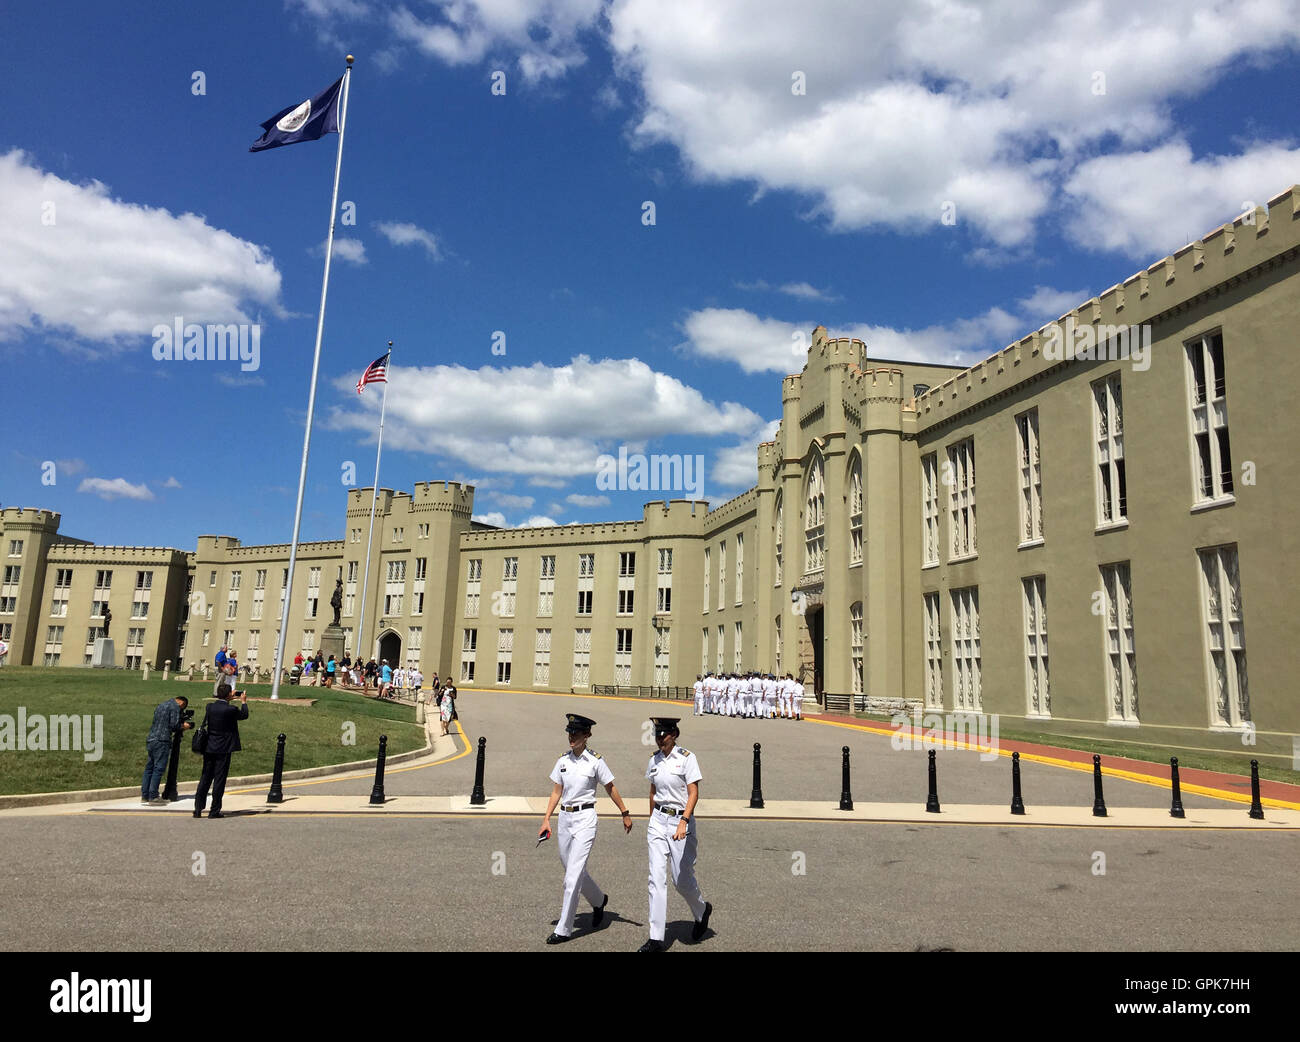 Lexington, USA. 3rd Sep, 2016. Two cadets walk at Virginia Military Institute (VMI) in Lexington, the United States, Sept. 3, 2016. VMI is a state-supported military college, one of the oldest institutions of the kind in the U.S. With lots of alumni including George Marshall, VMI has been called the 'West Point of the South'. © Yin Bogu/Xinhua/Alamy Live News Stock Photo